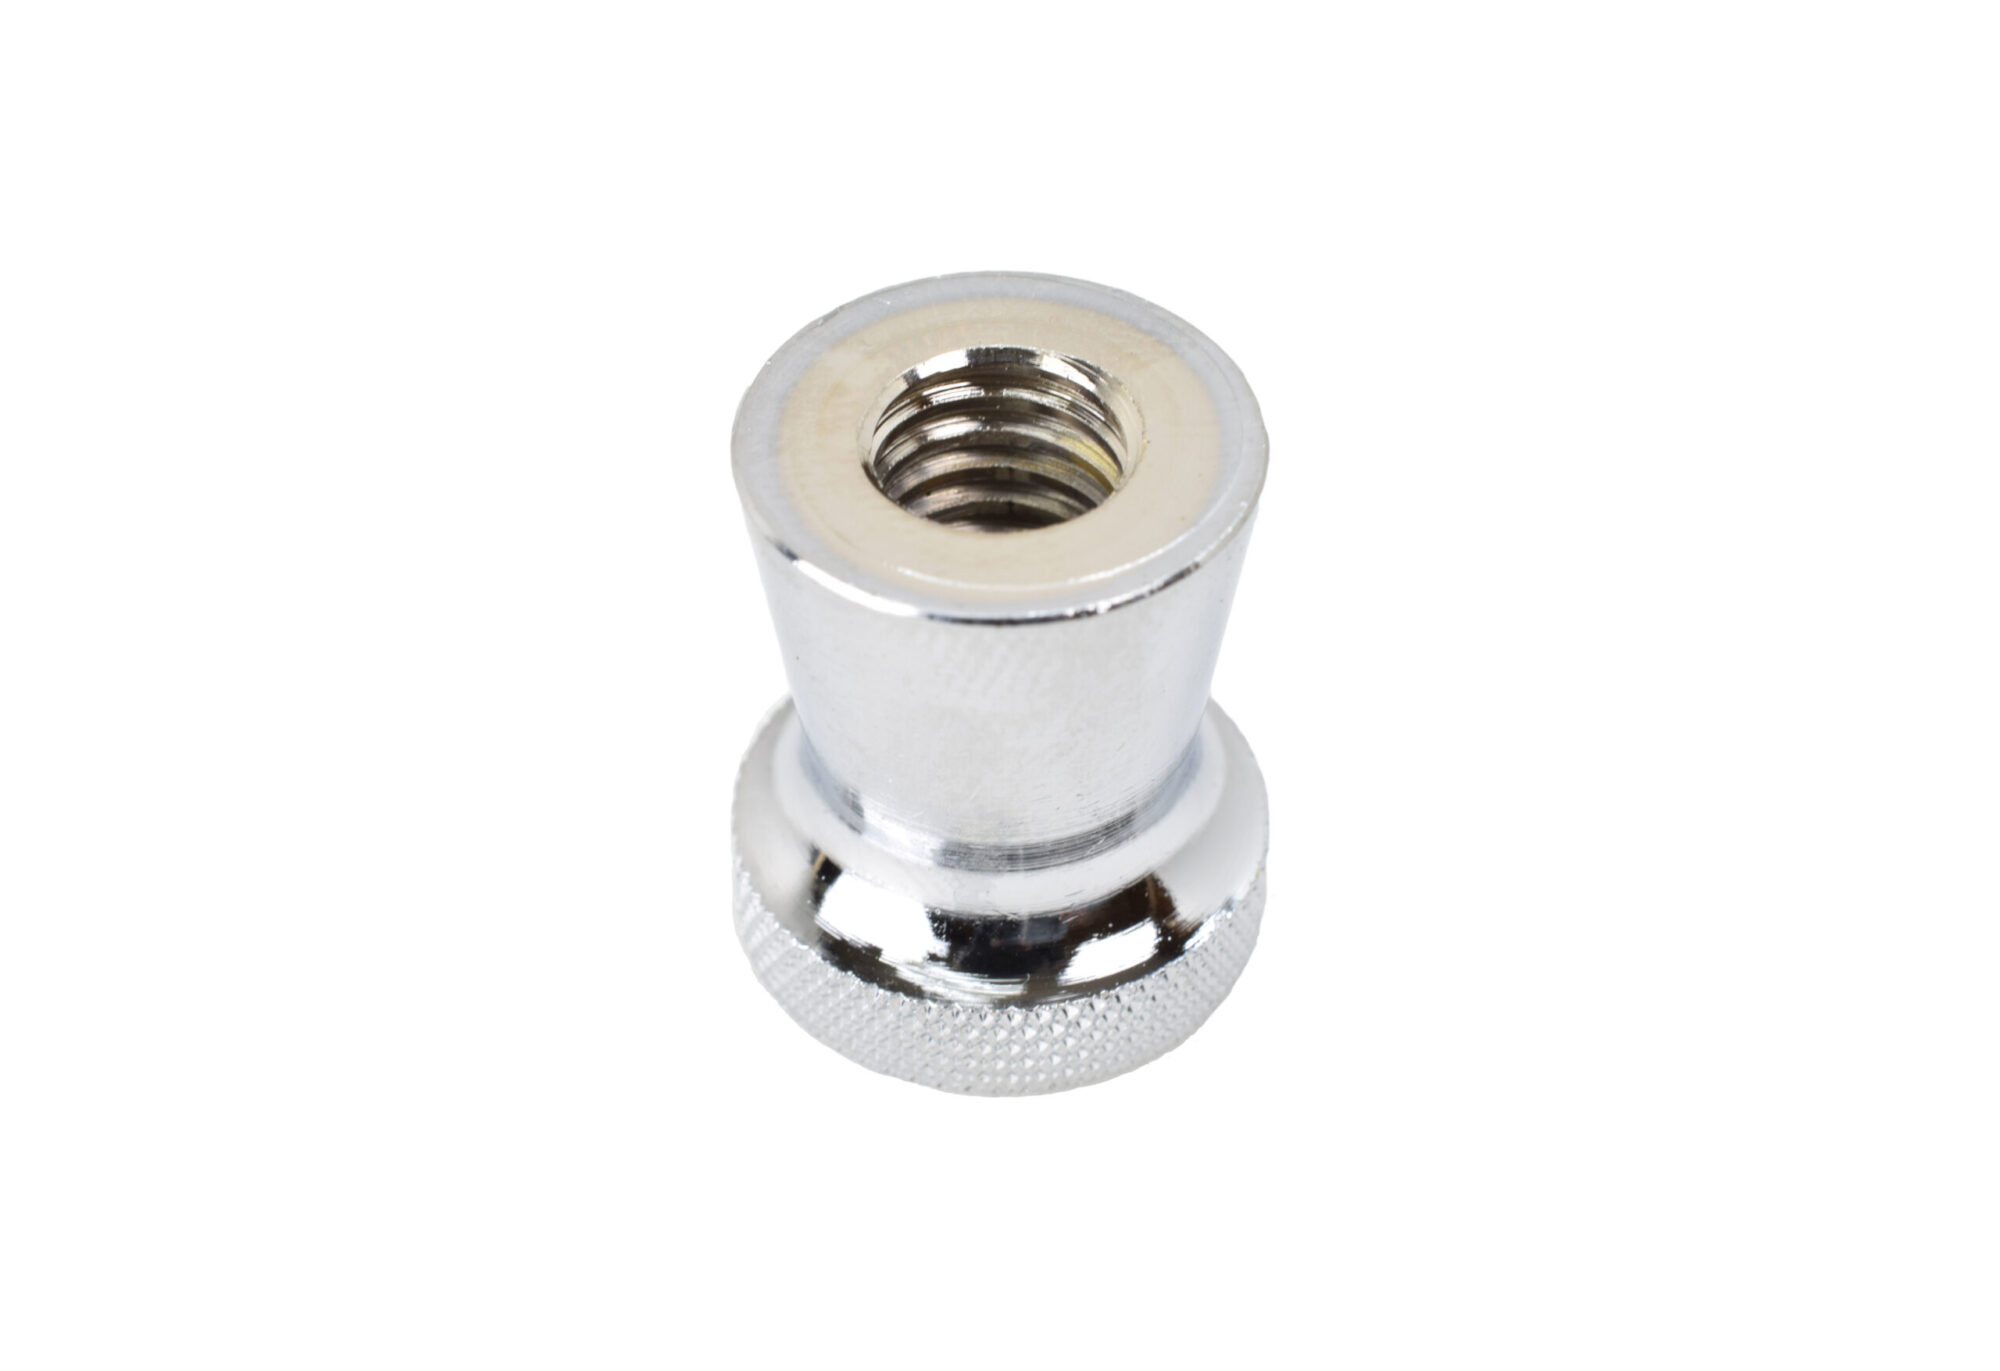 1302 Chrome Plated Collar for a Faucet Lever